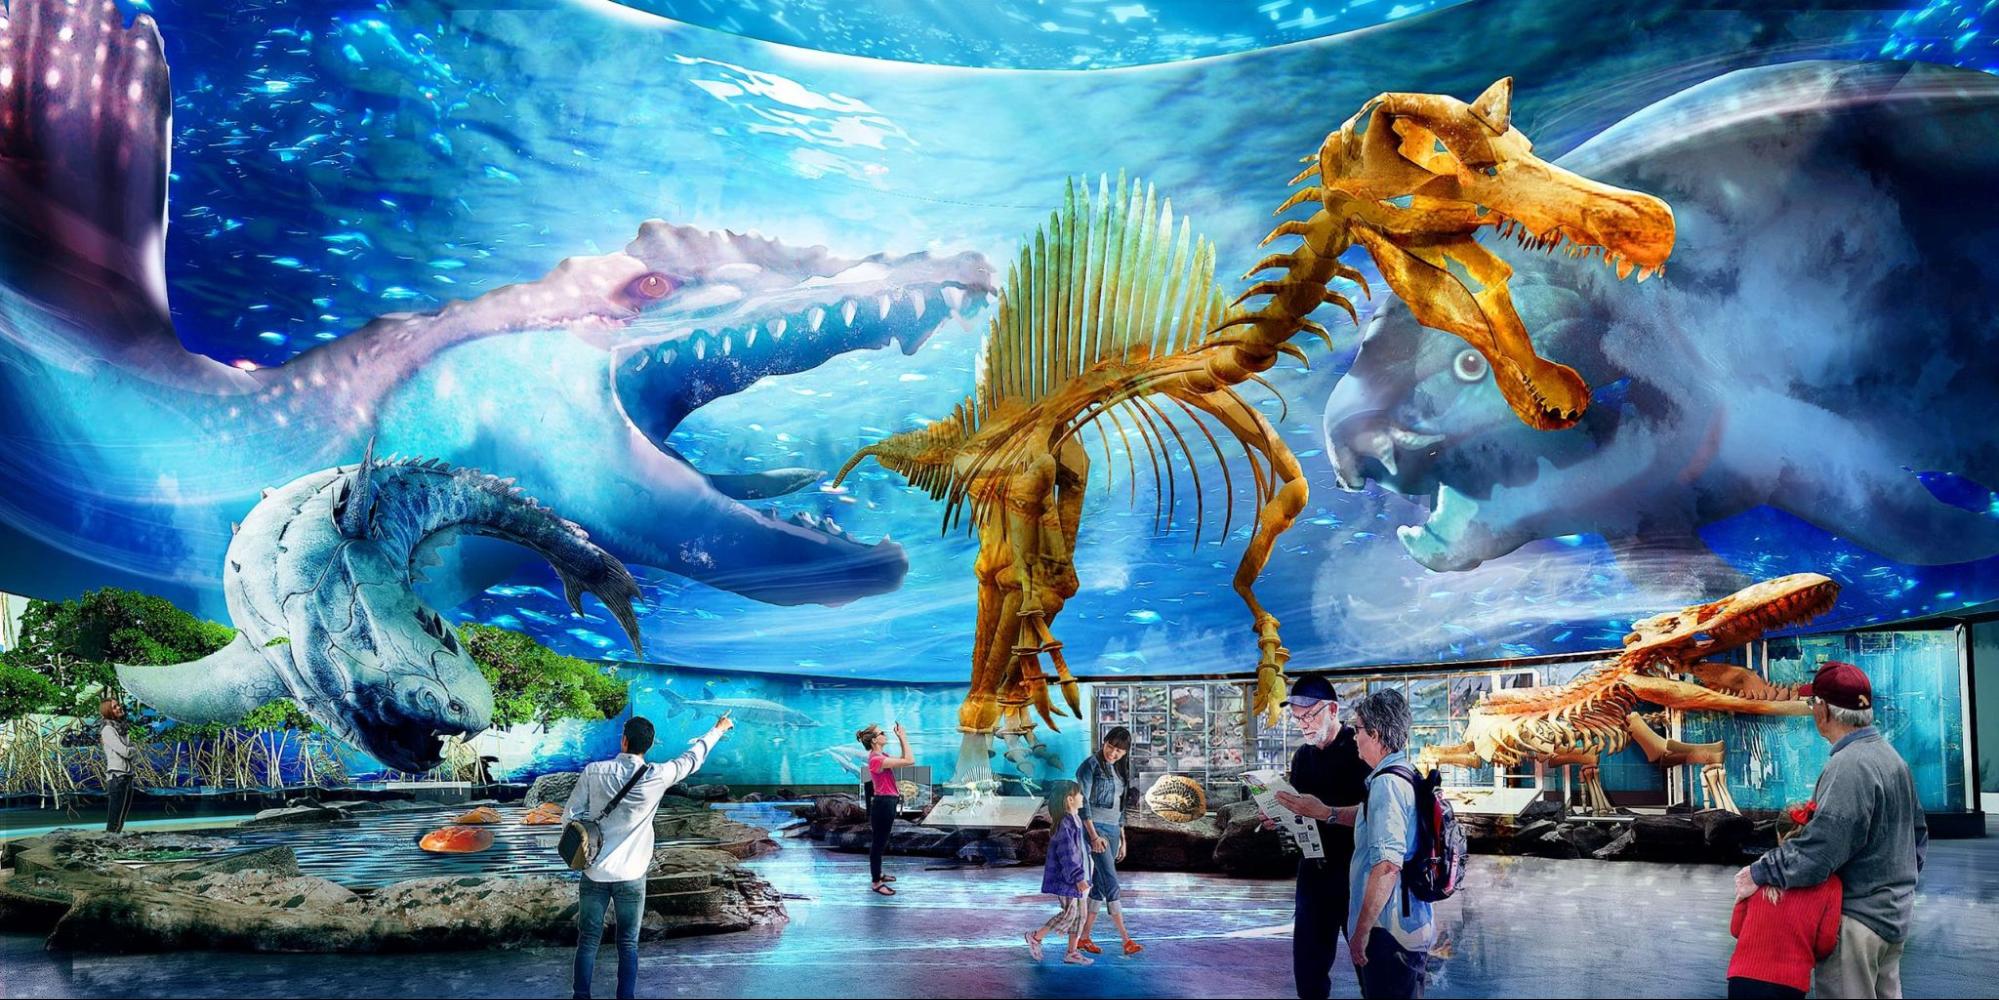 New and Upcoming Attractions in Singapore - Tentative Prehistoric Exhibit